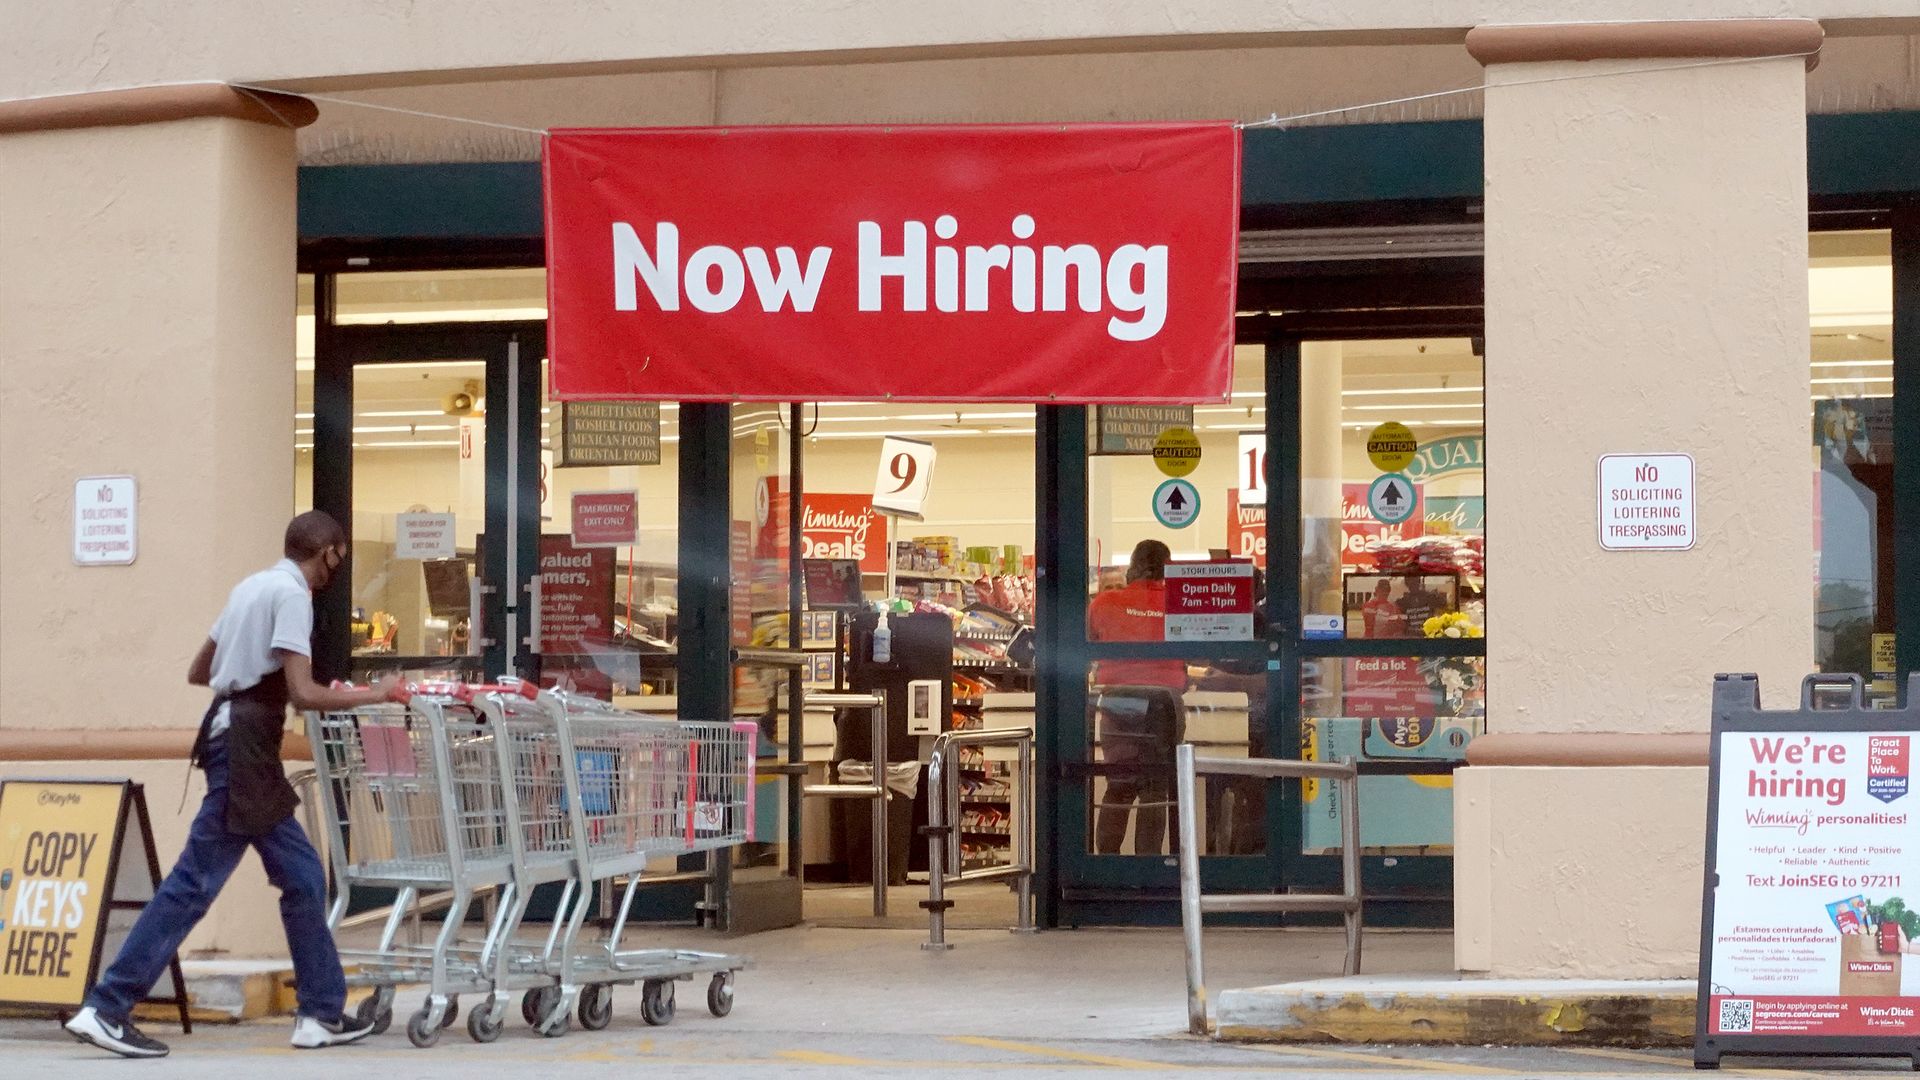 Worker pushing carts with a now hiring sign